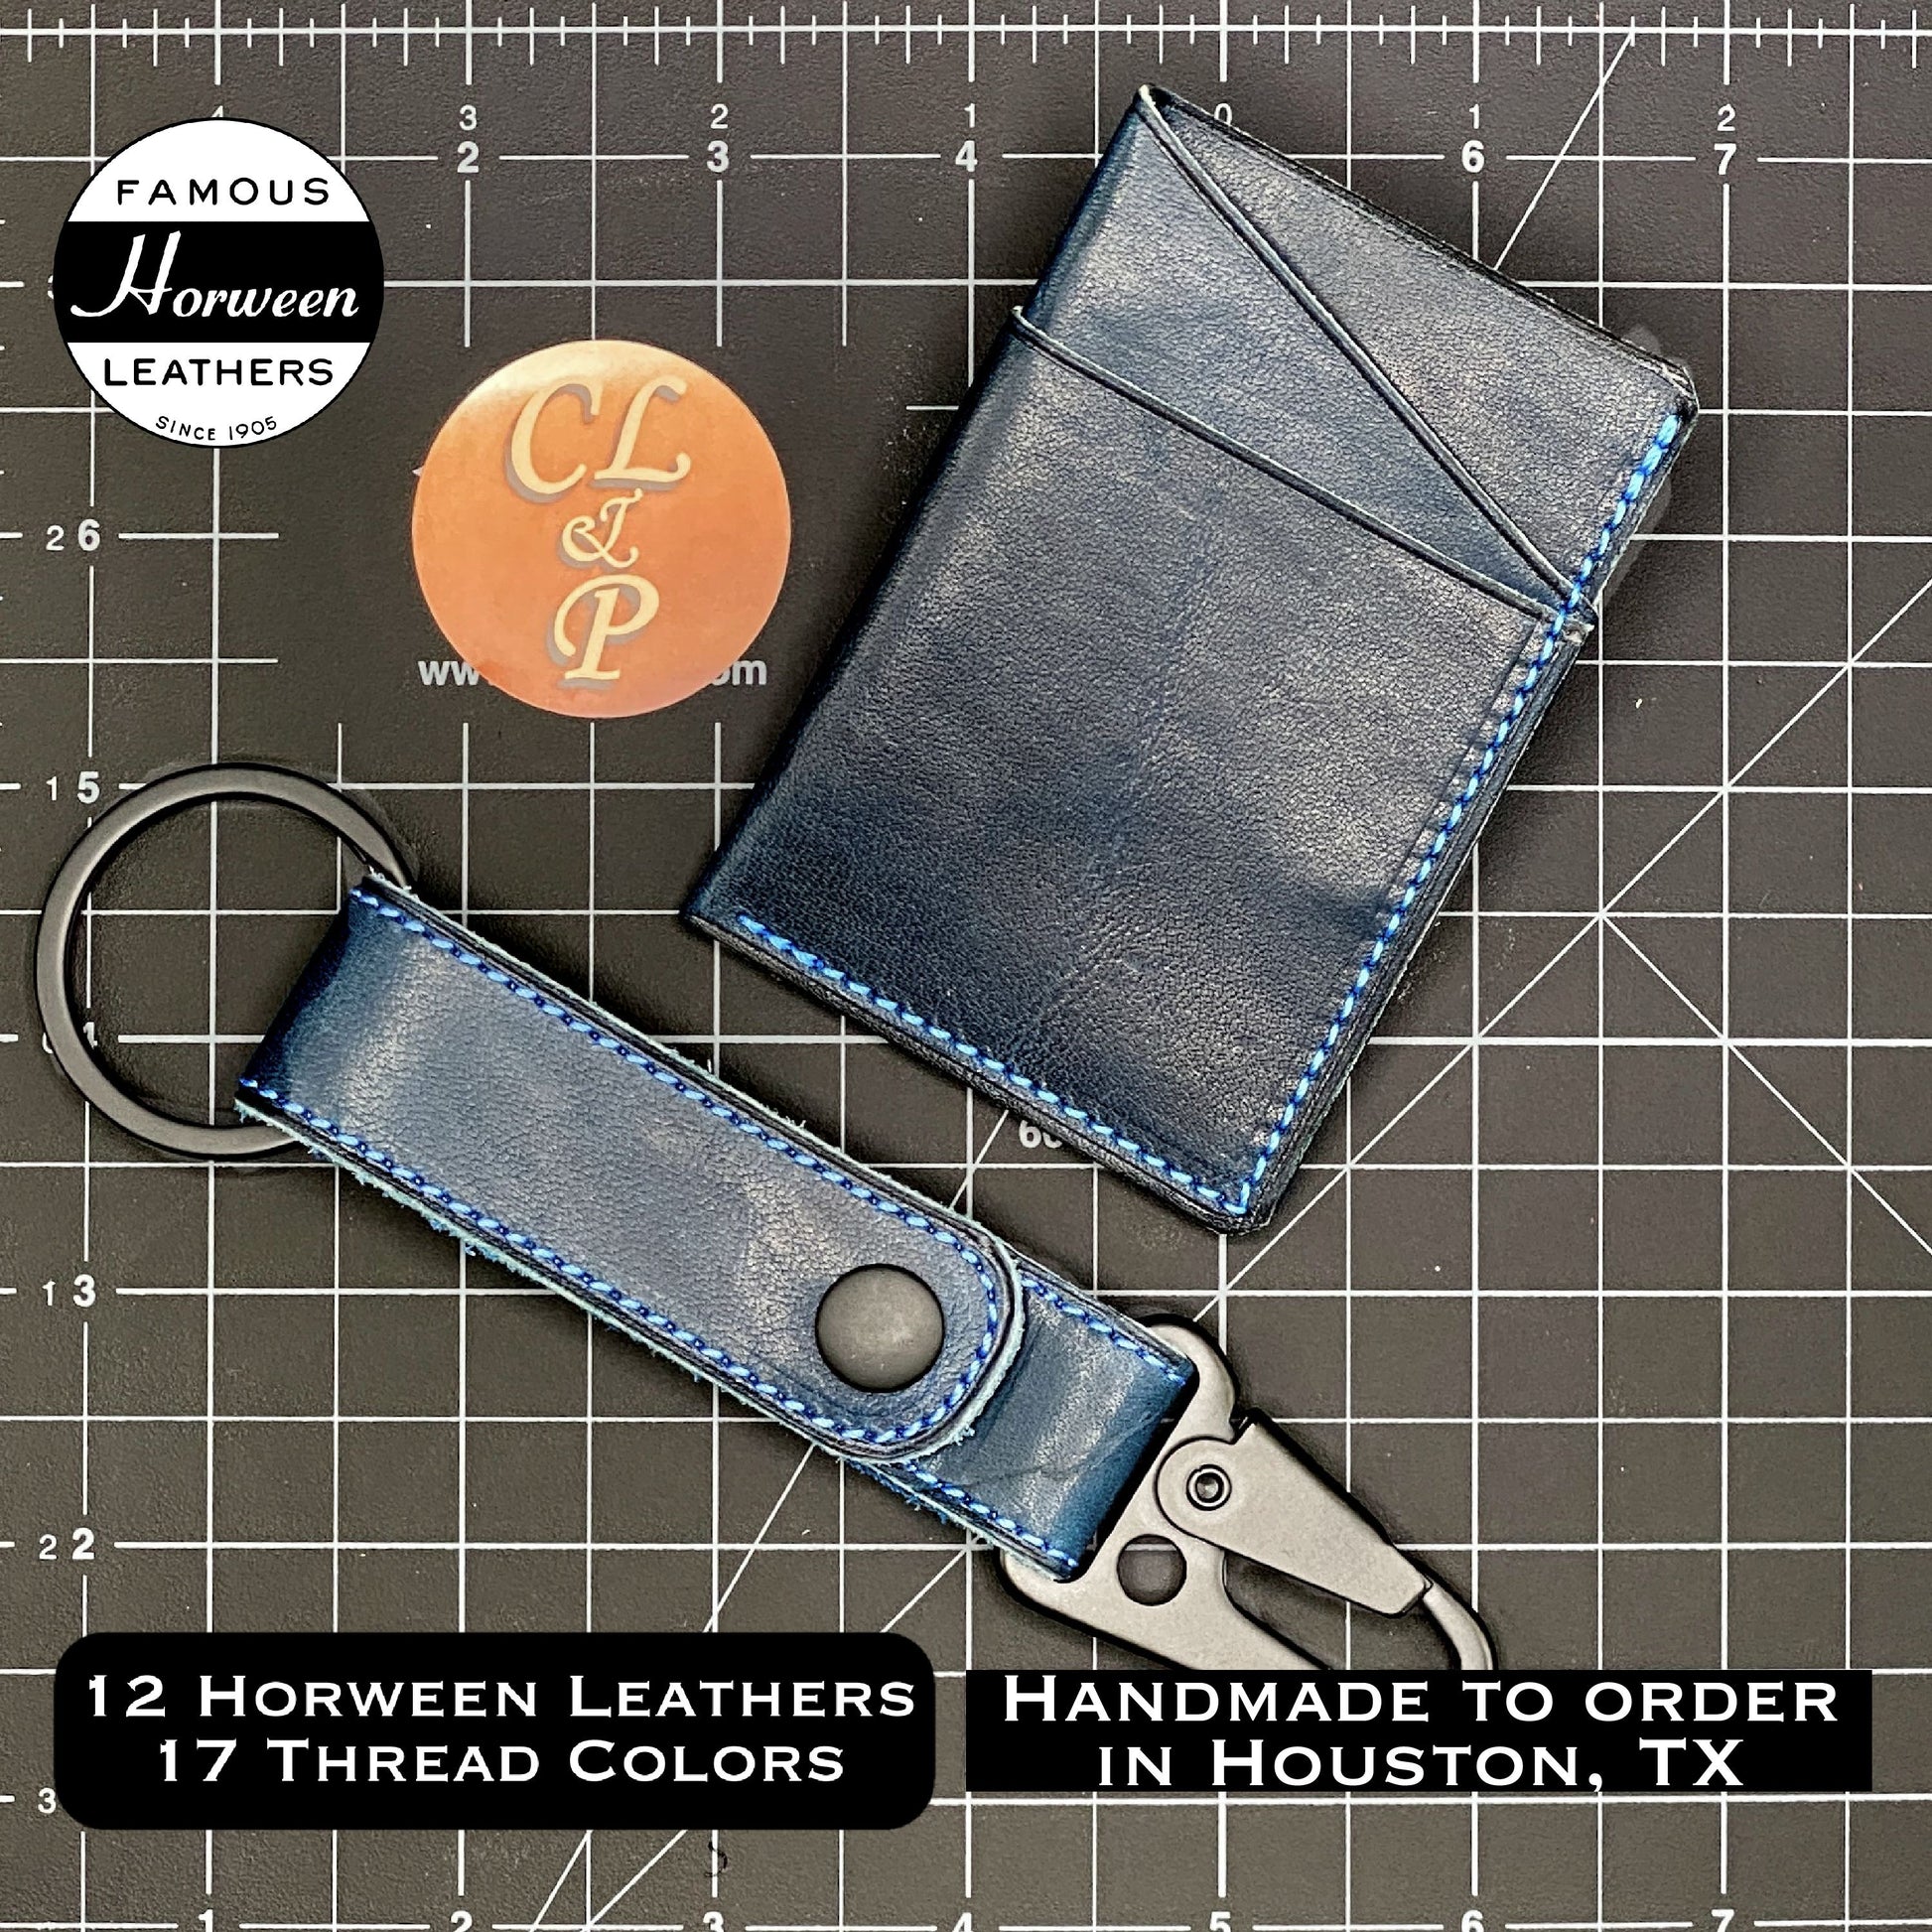 Custom EDC3 Minimalist Wallet in Cobalt Blue Horween Leather with Ocean Blue Accent Stitching | Handmade Compact EDC Small Mini Wallet by Custom Leather and Pen in Houston, TX